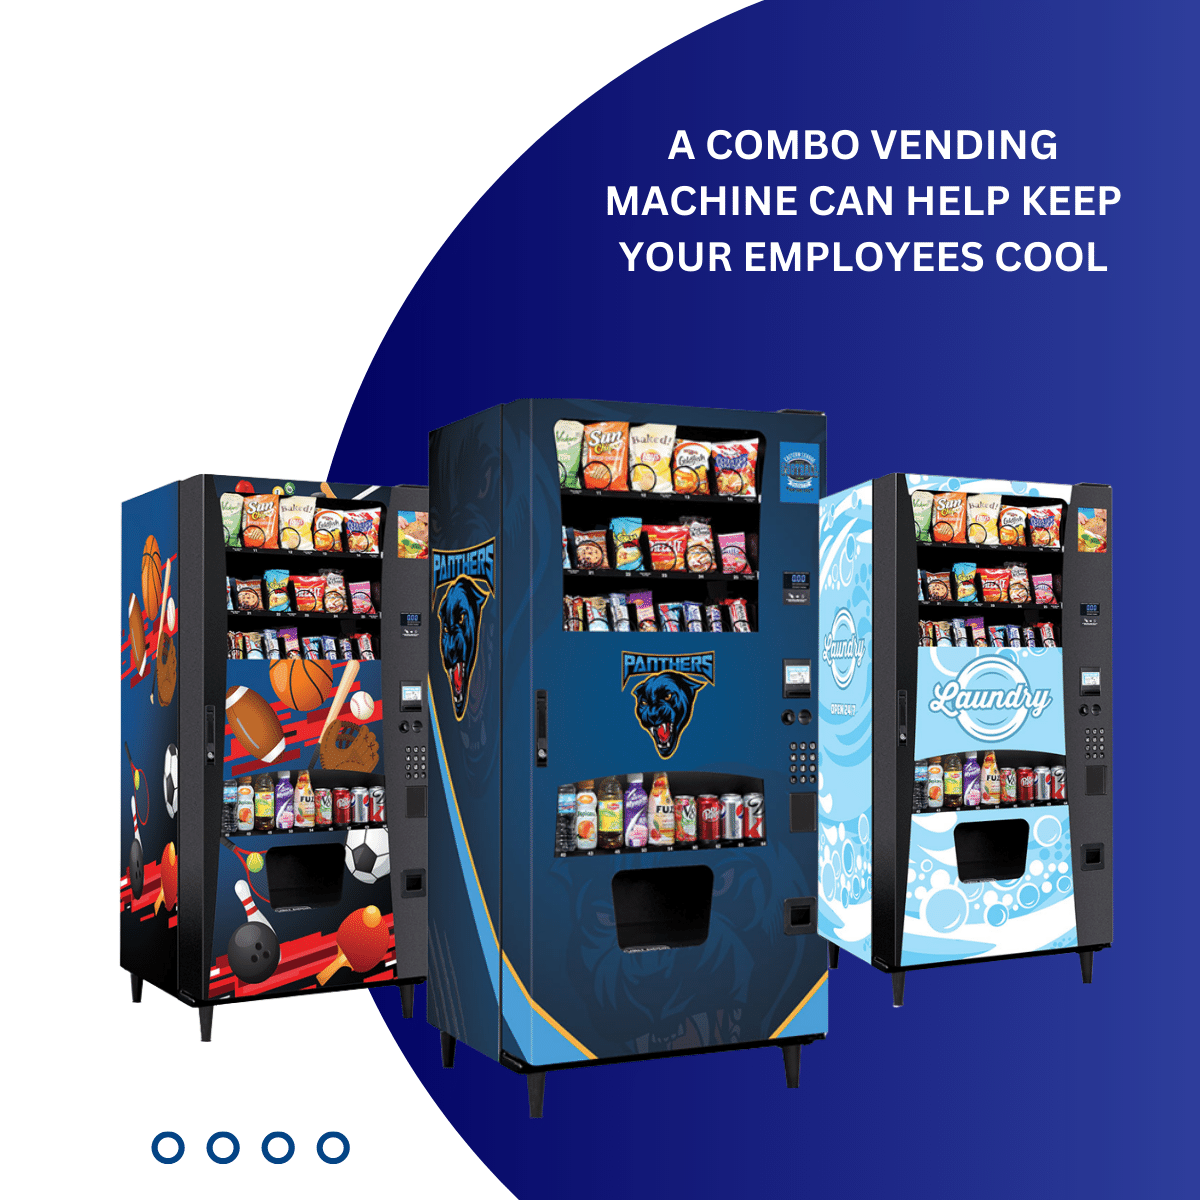 A COMBO VENDING MACHINE CAN HELP KEEP YOUR EMPLOYEES COOL